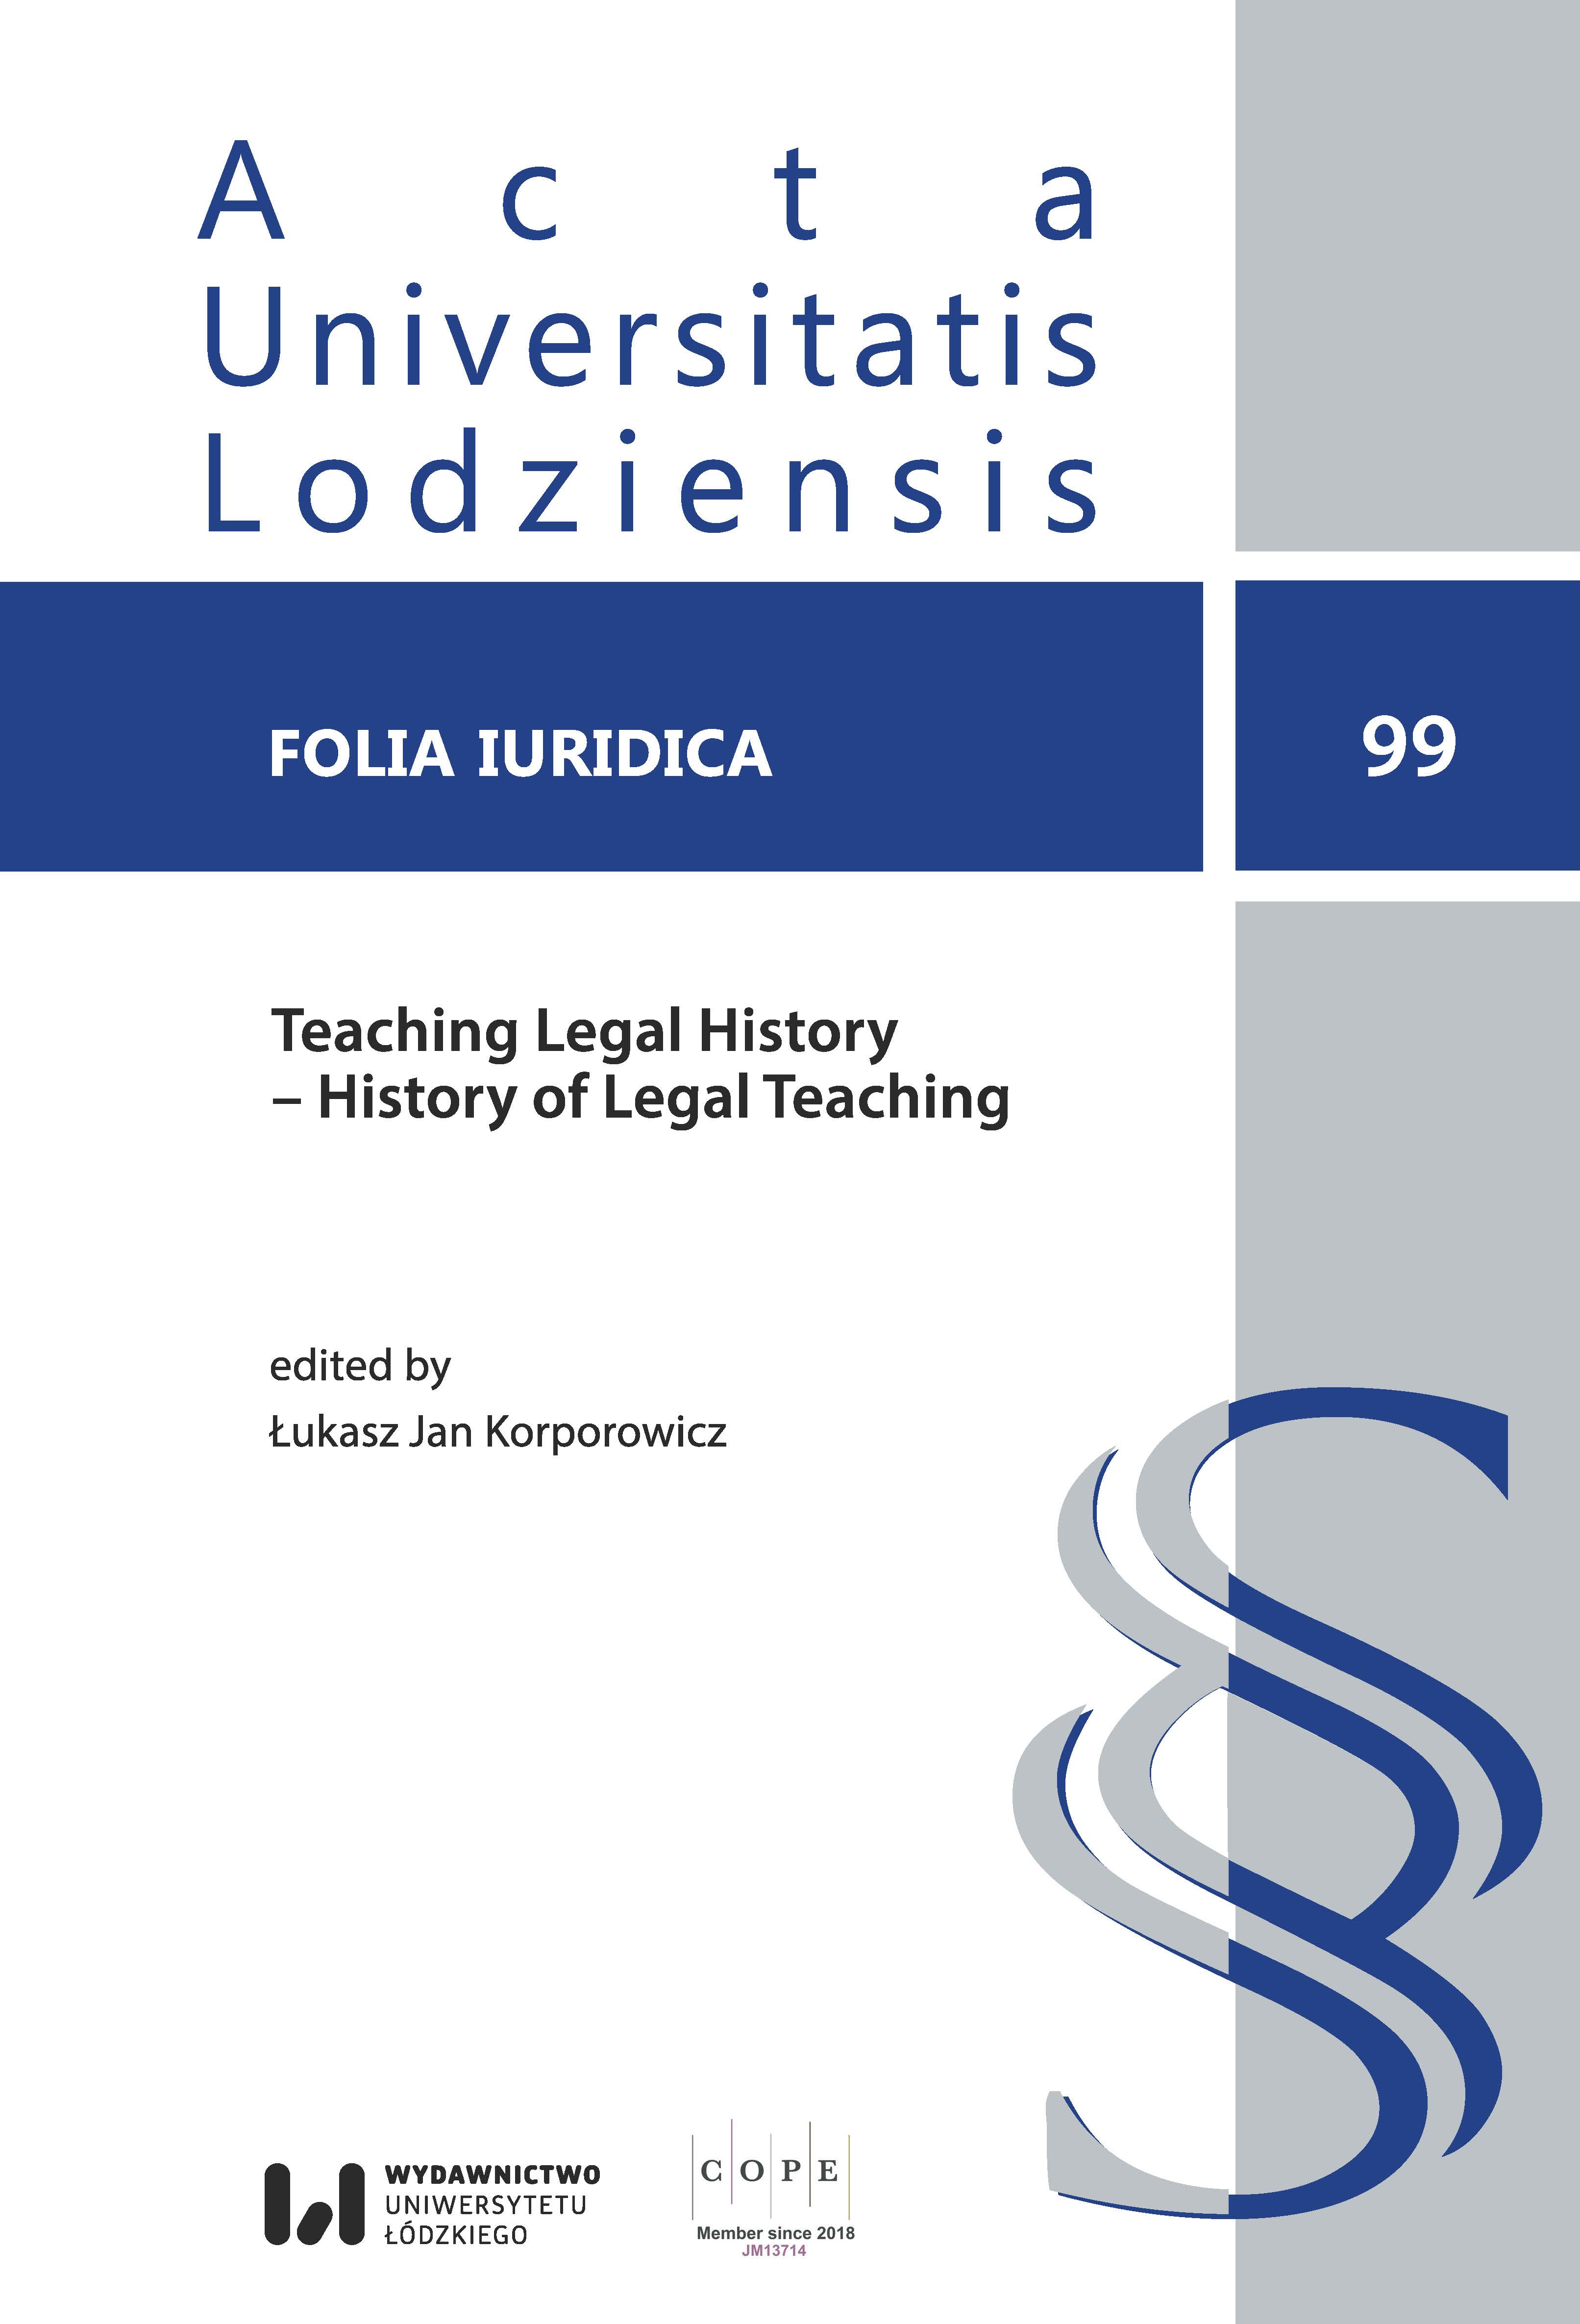 At the Dawn of Legal History: Teaching Law in Ancient Mesopotamia